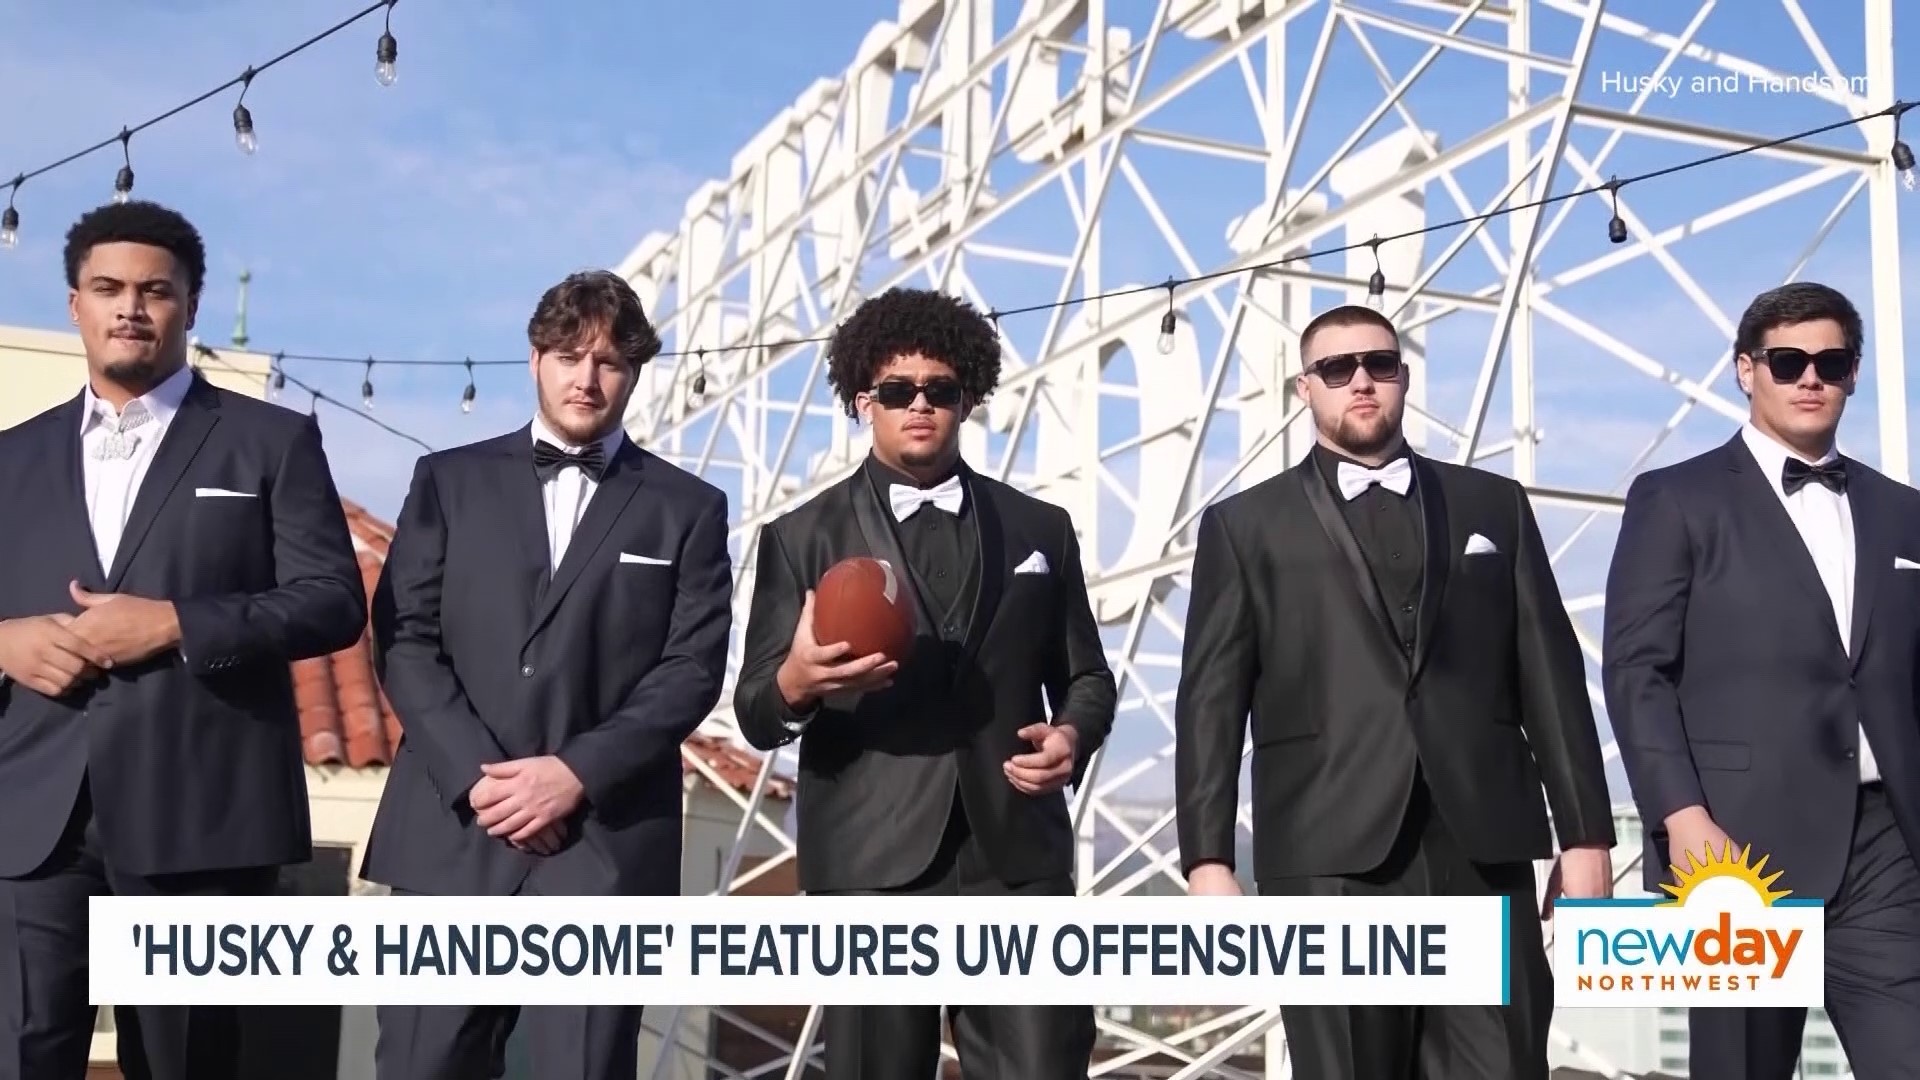 To "kick off" their new campaign, actors Cedric The Entertainer and Anthony Anderson invited five members of the 2023 UW Huskies offensive line to a photoshoot.